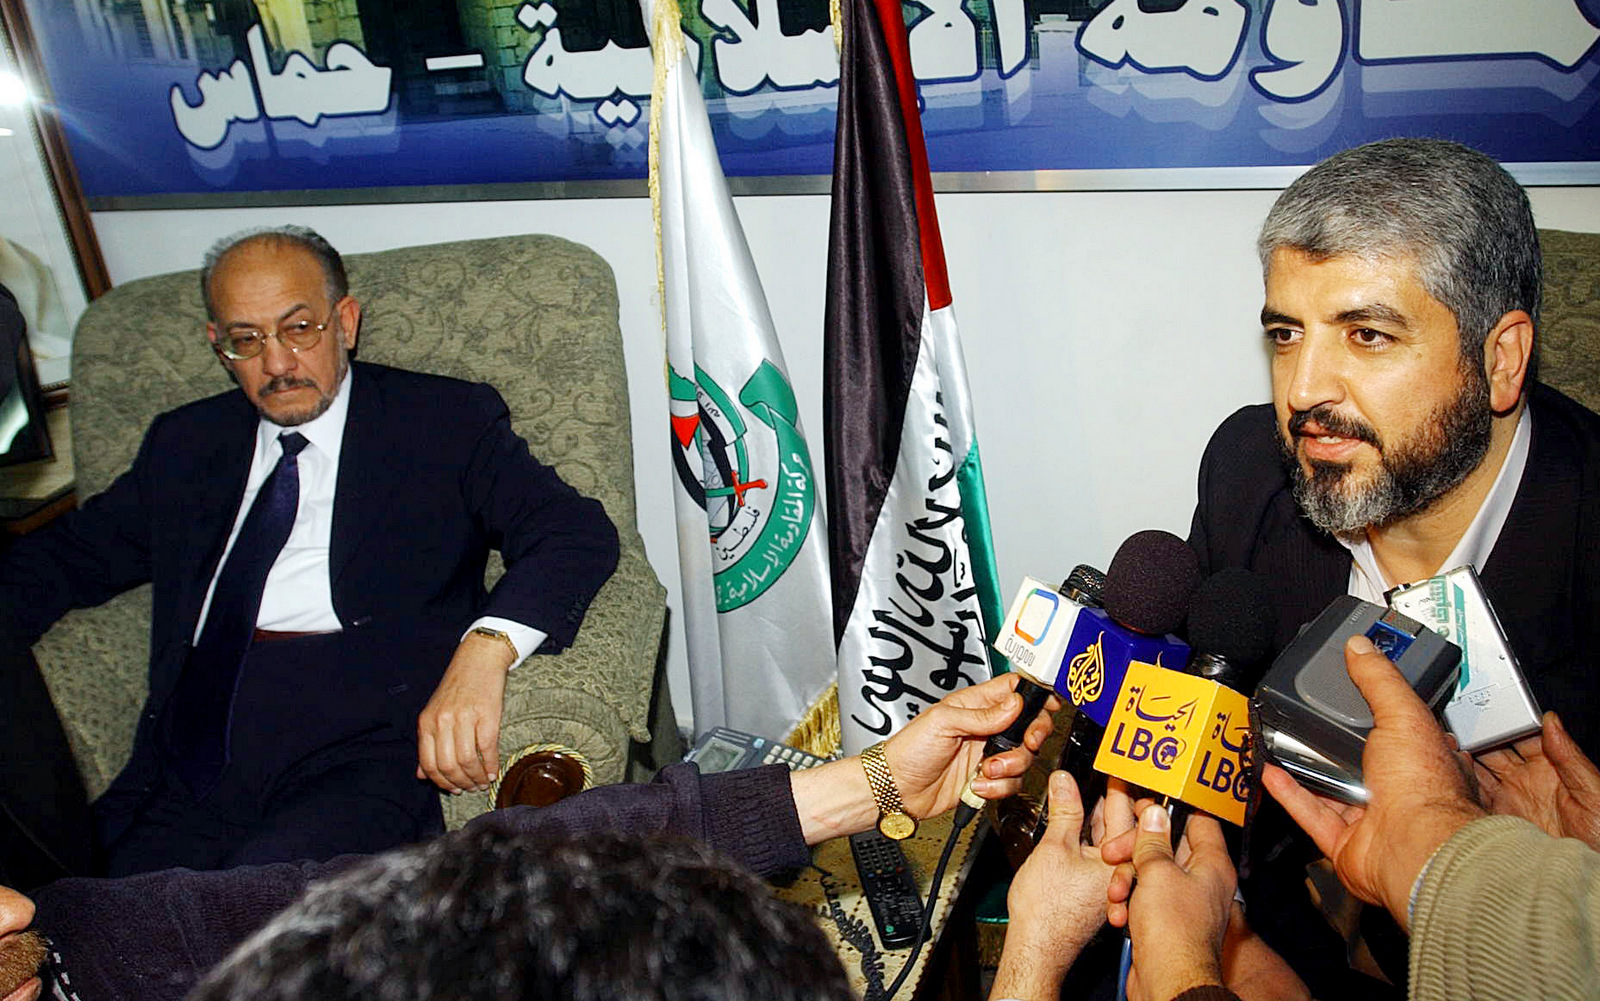 Highly ranking Muslim Brotherhood official Abdul-Majeed Zneibat, left, listens as Hamas leader Khaled Mashaal, right, talks to reporters in Damascus, Tuesday Jan, 31, 2006 . (AP/Bassm Tellawi).